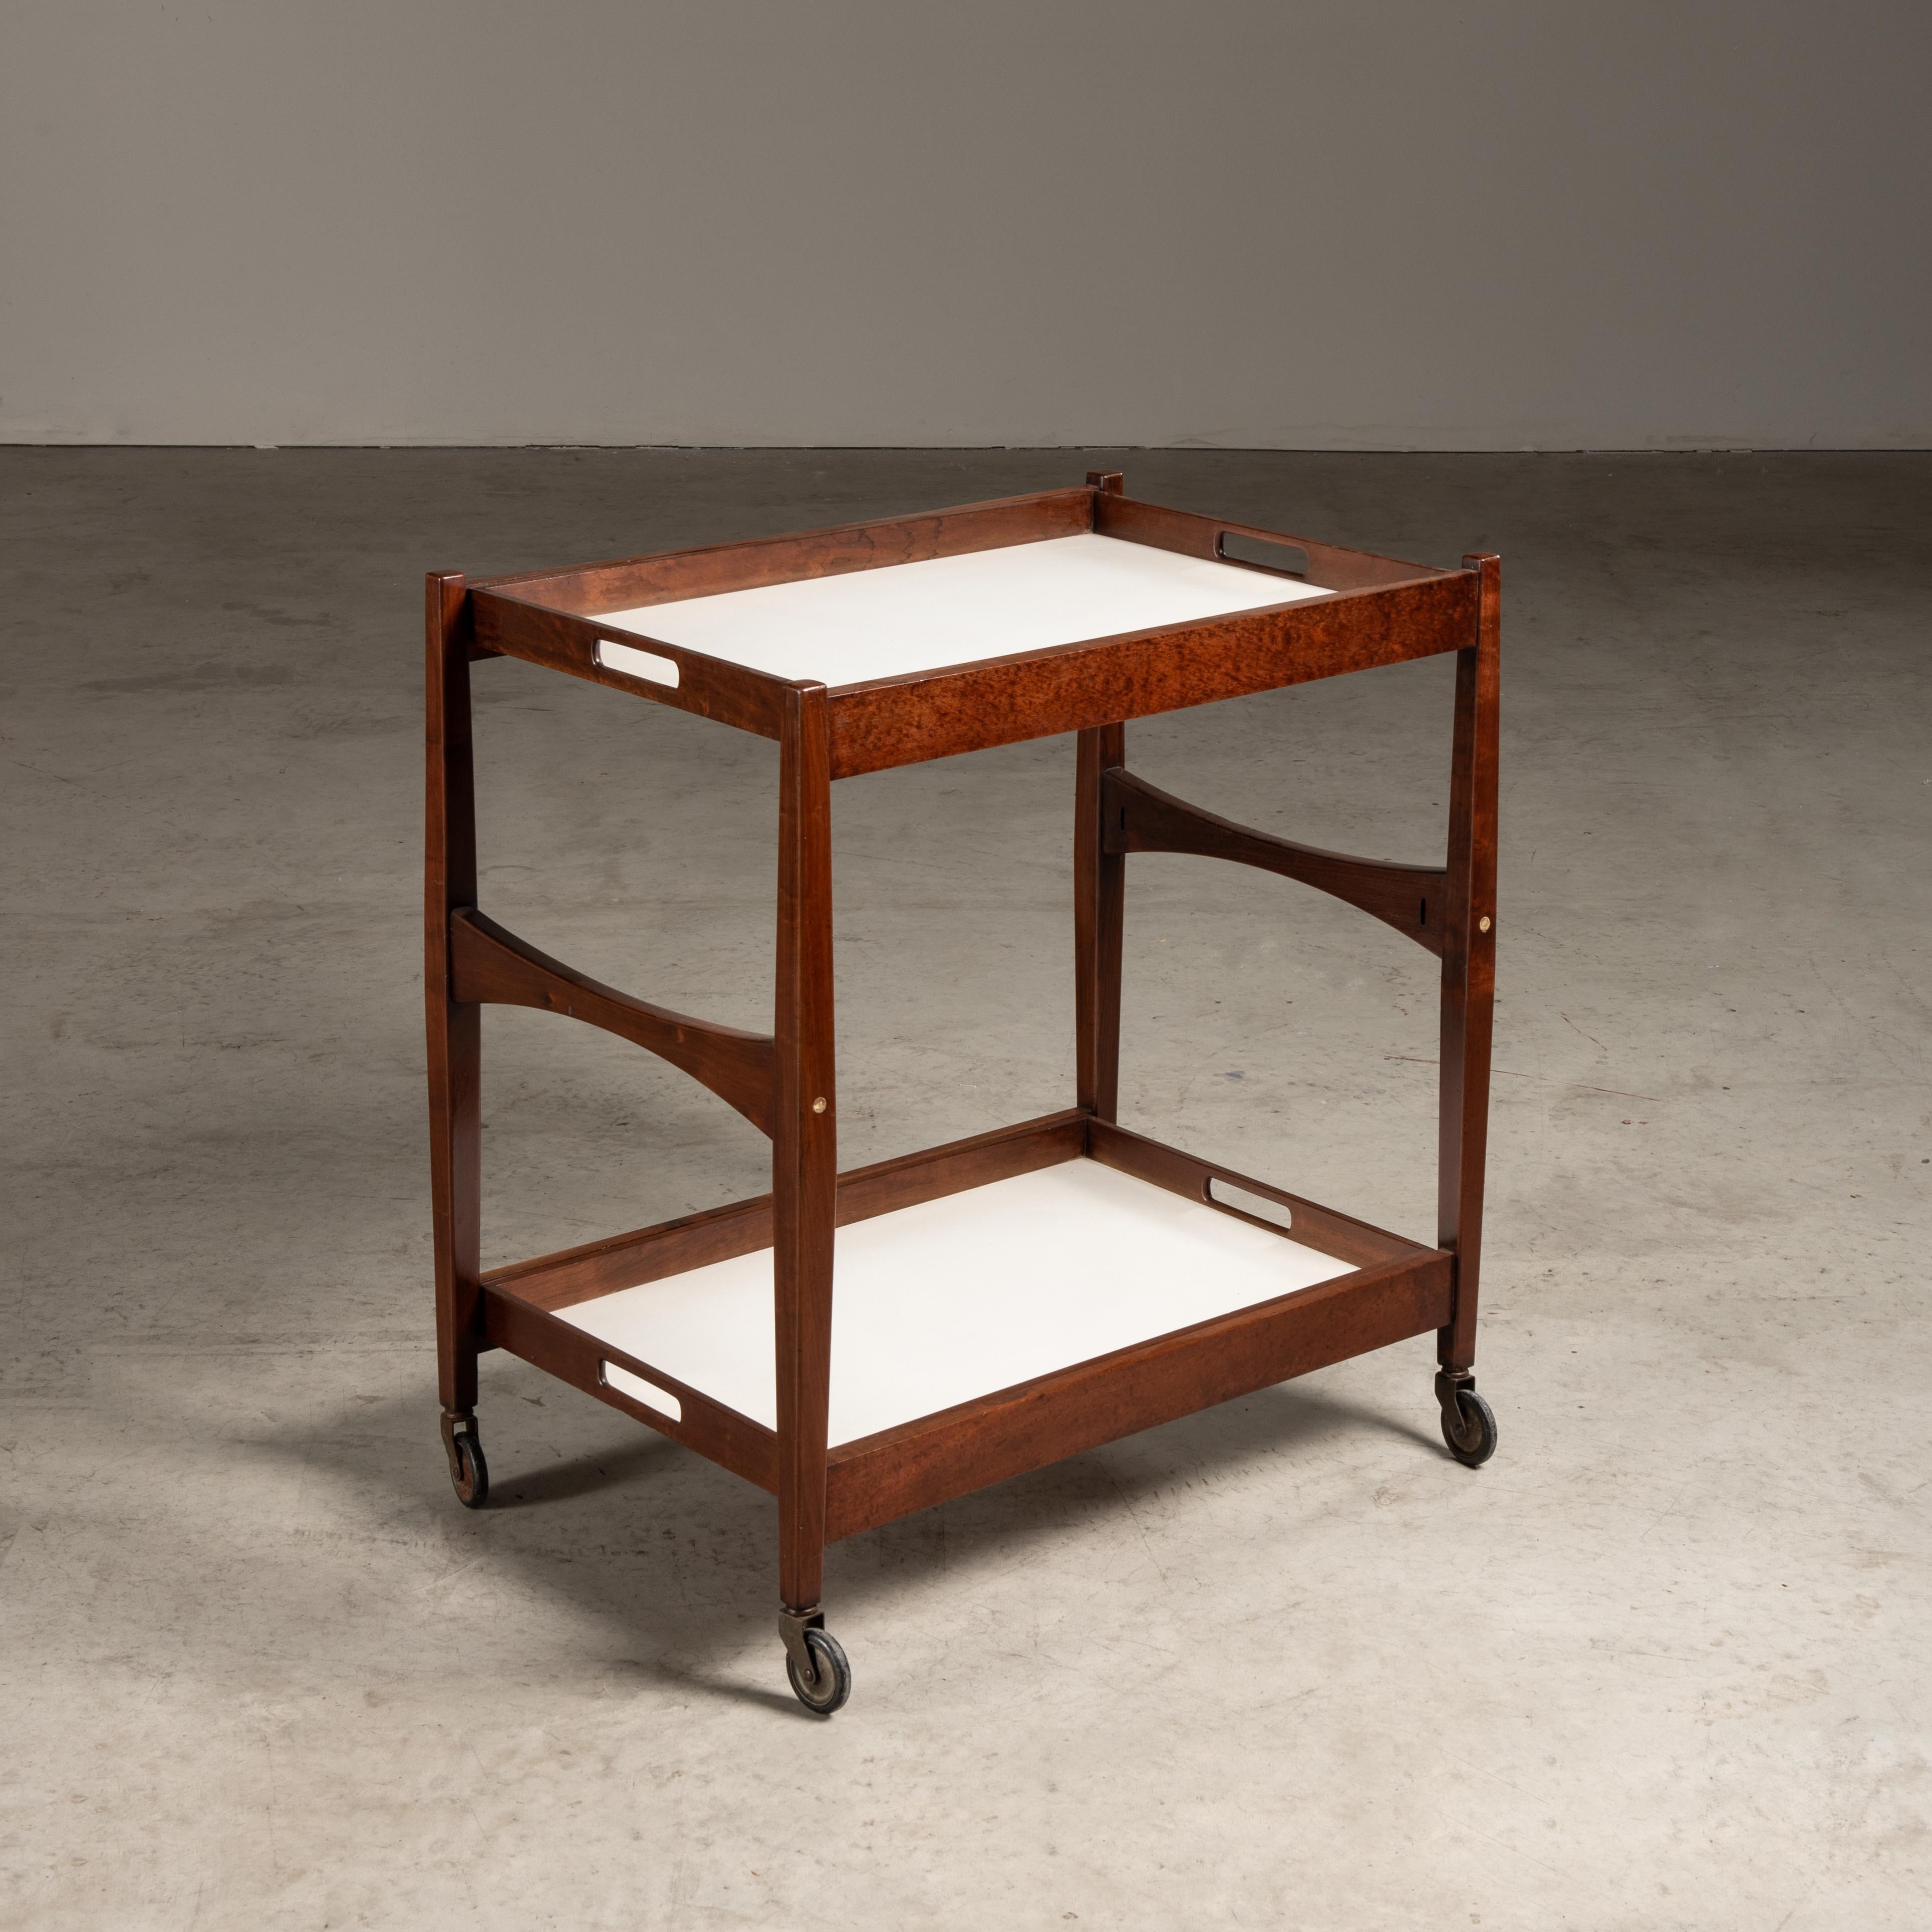 This tea table cart, a product of mid-20th-century design, encapsulates the essence of the era with its functional form and use of both traditional and modern materials. The designer, though unknown, has left a distinctive mark through this piece,